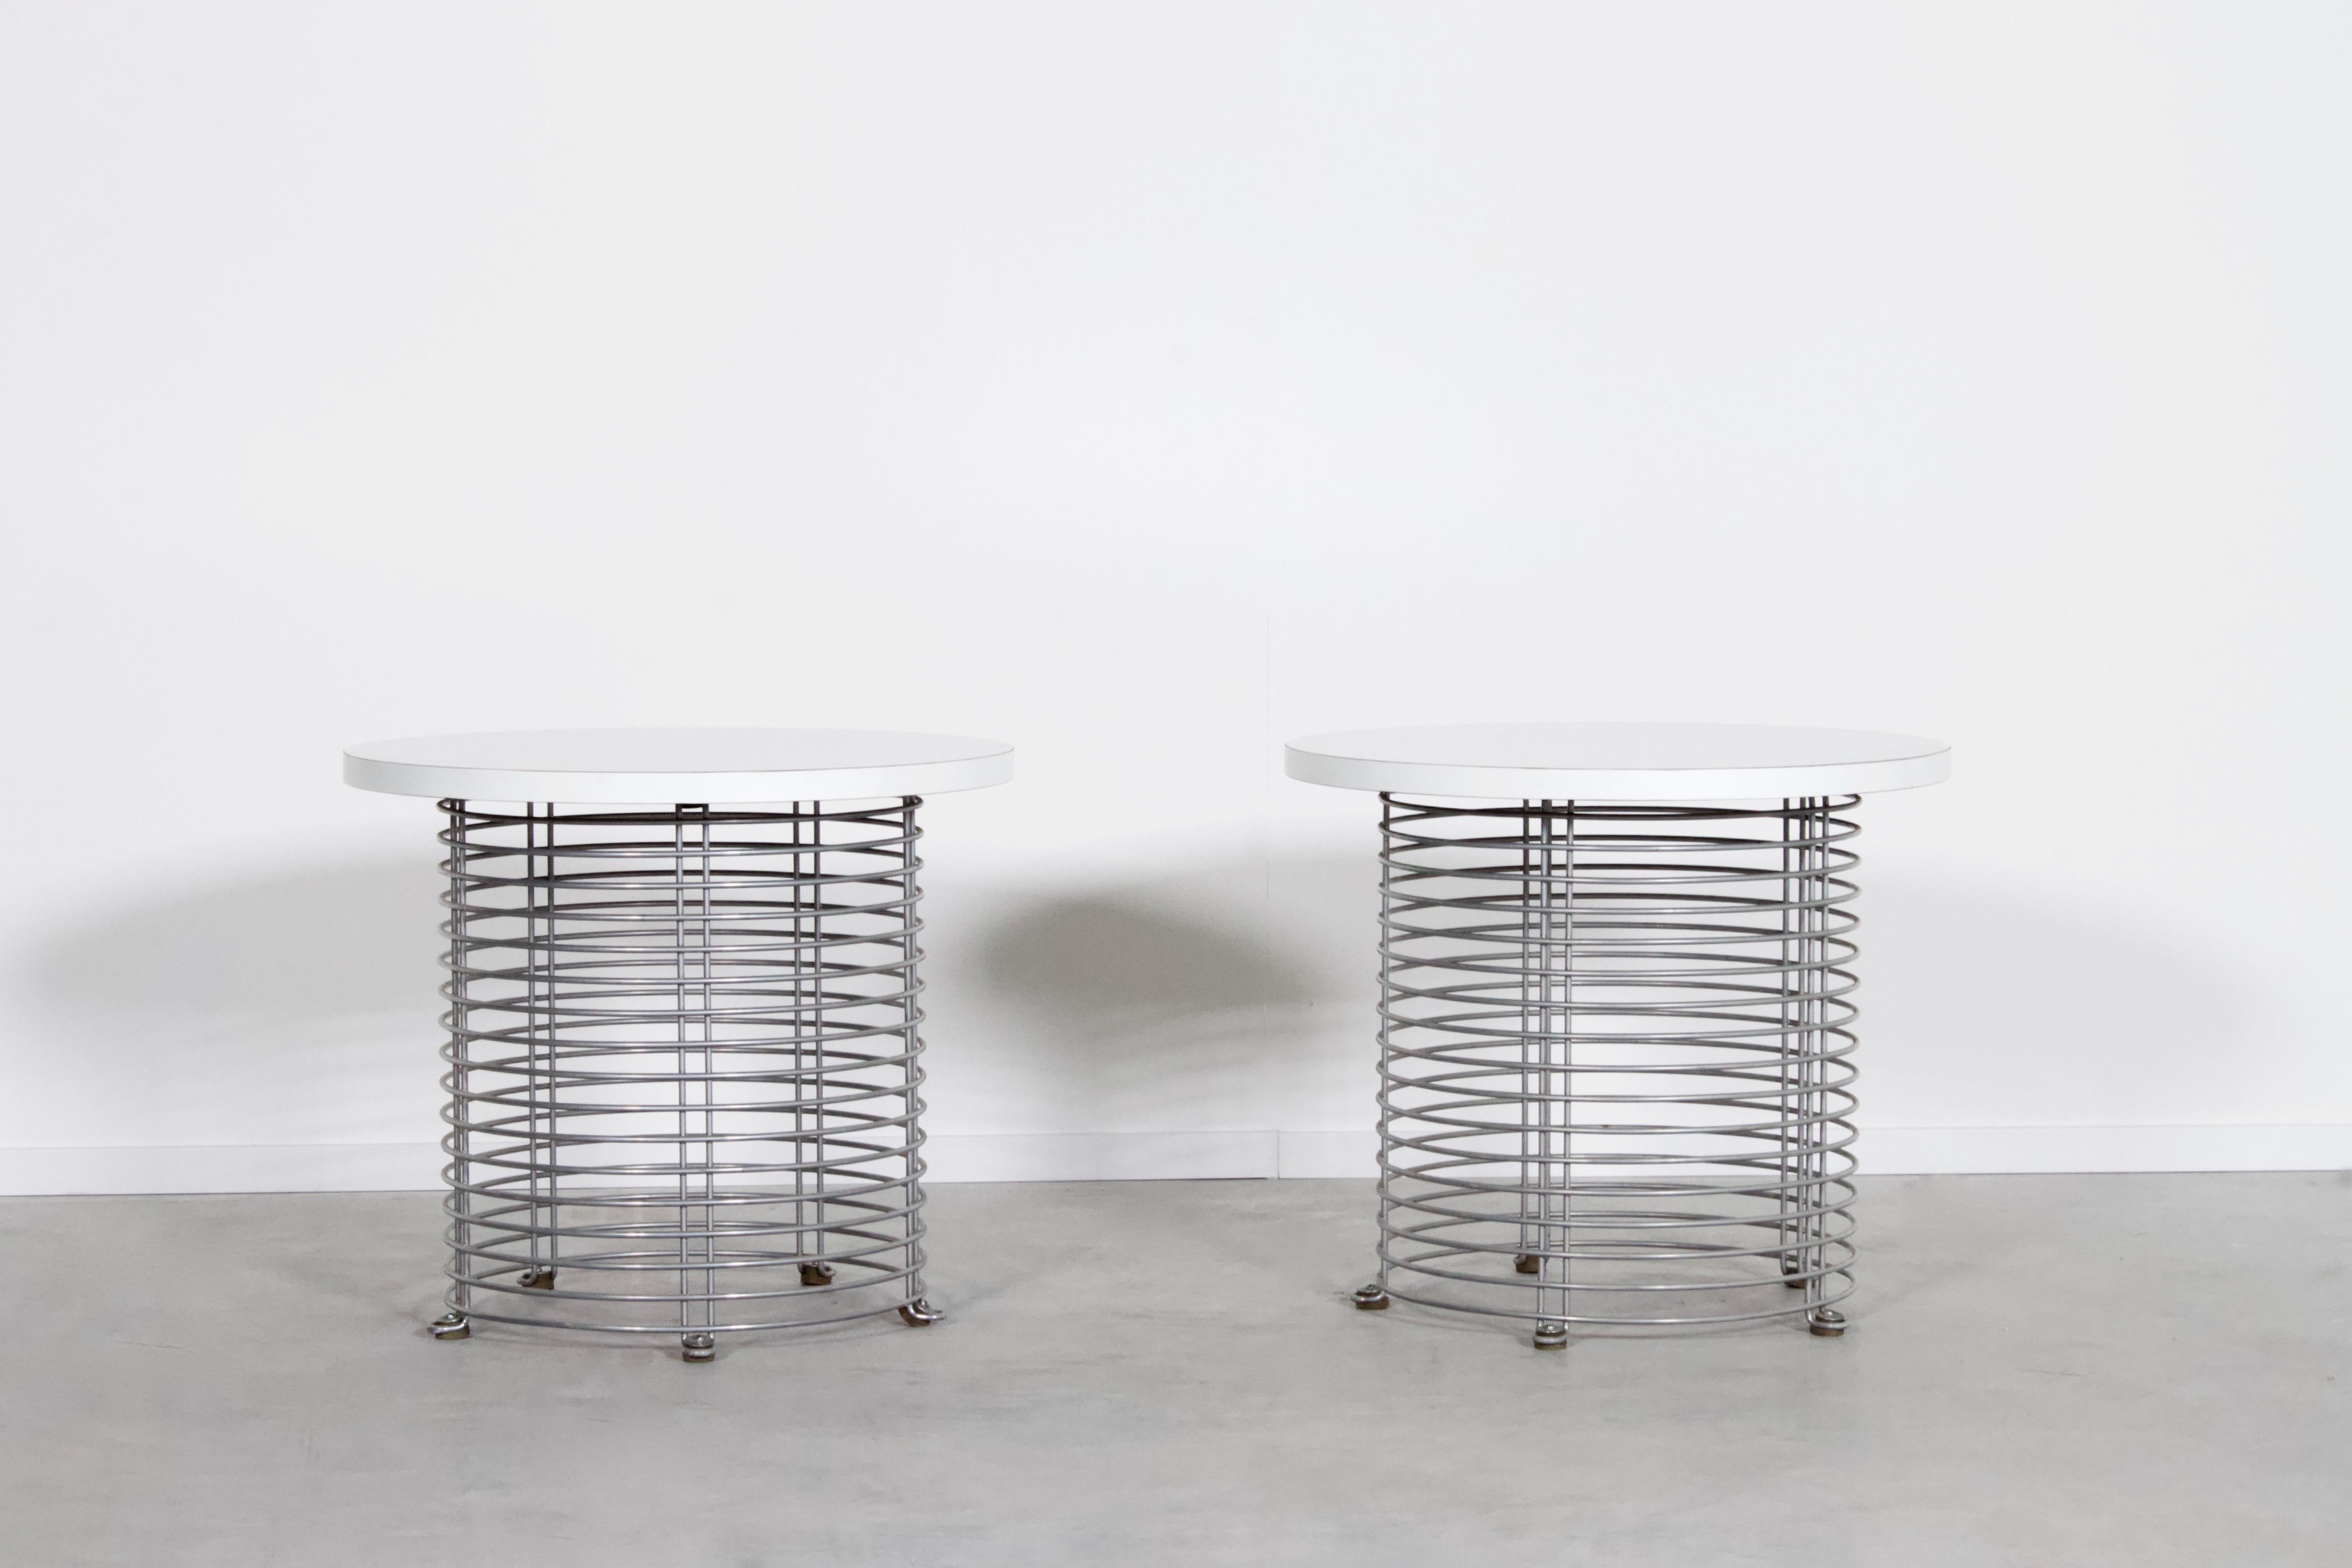 Space Age Set of Two ‘Pantonova’ Wire Tables by Verner Panton for Fritz Hansen, 1971 For Sale